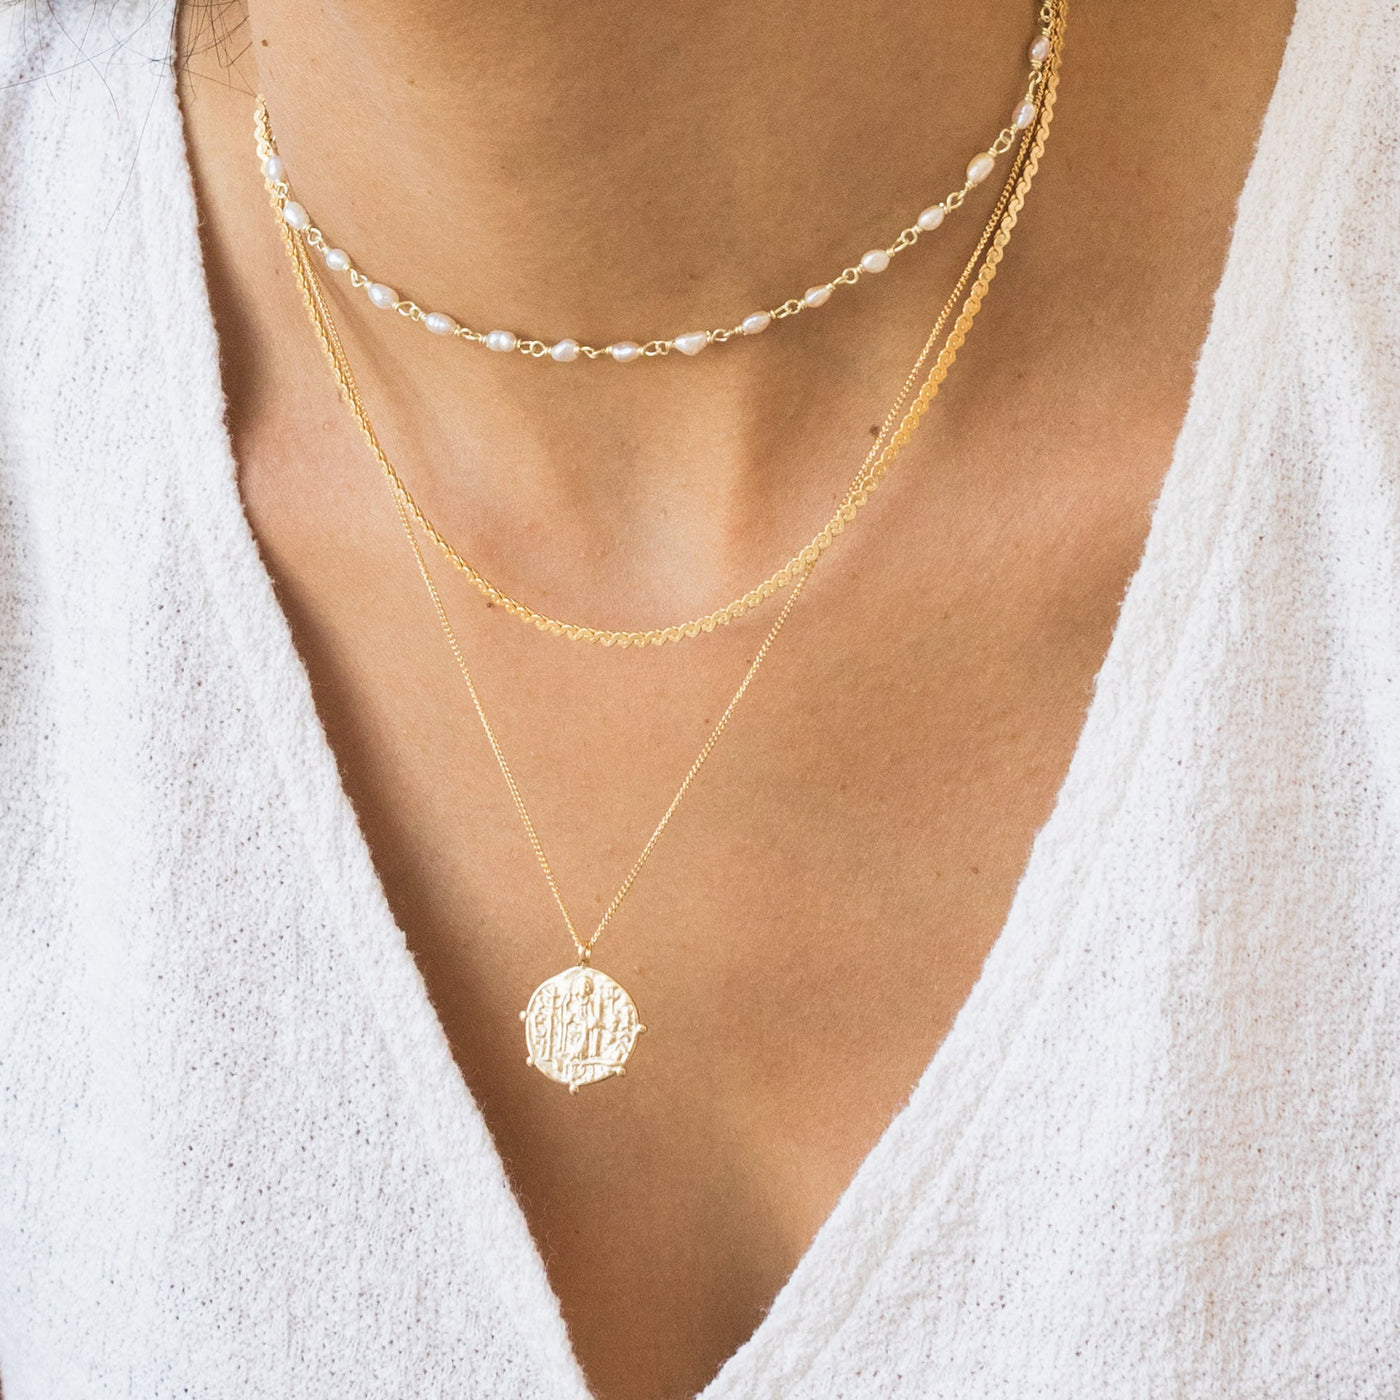 Pearl Chain Necklace | Simple & Dainty Jewelry